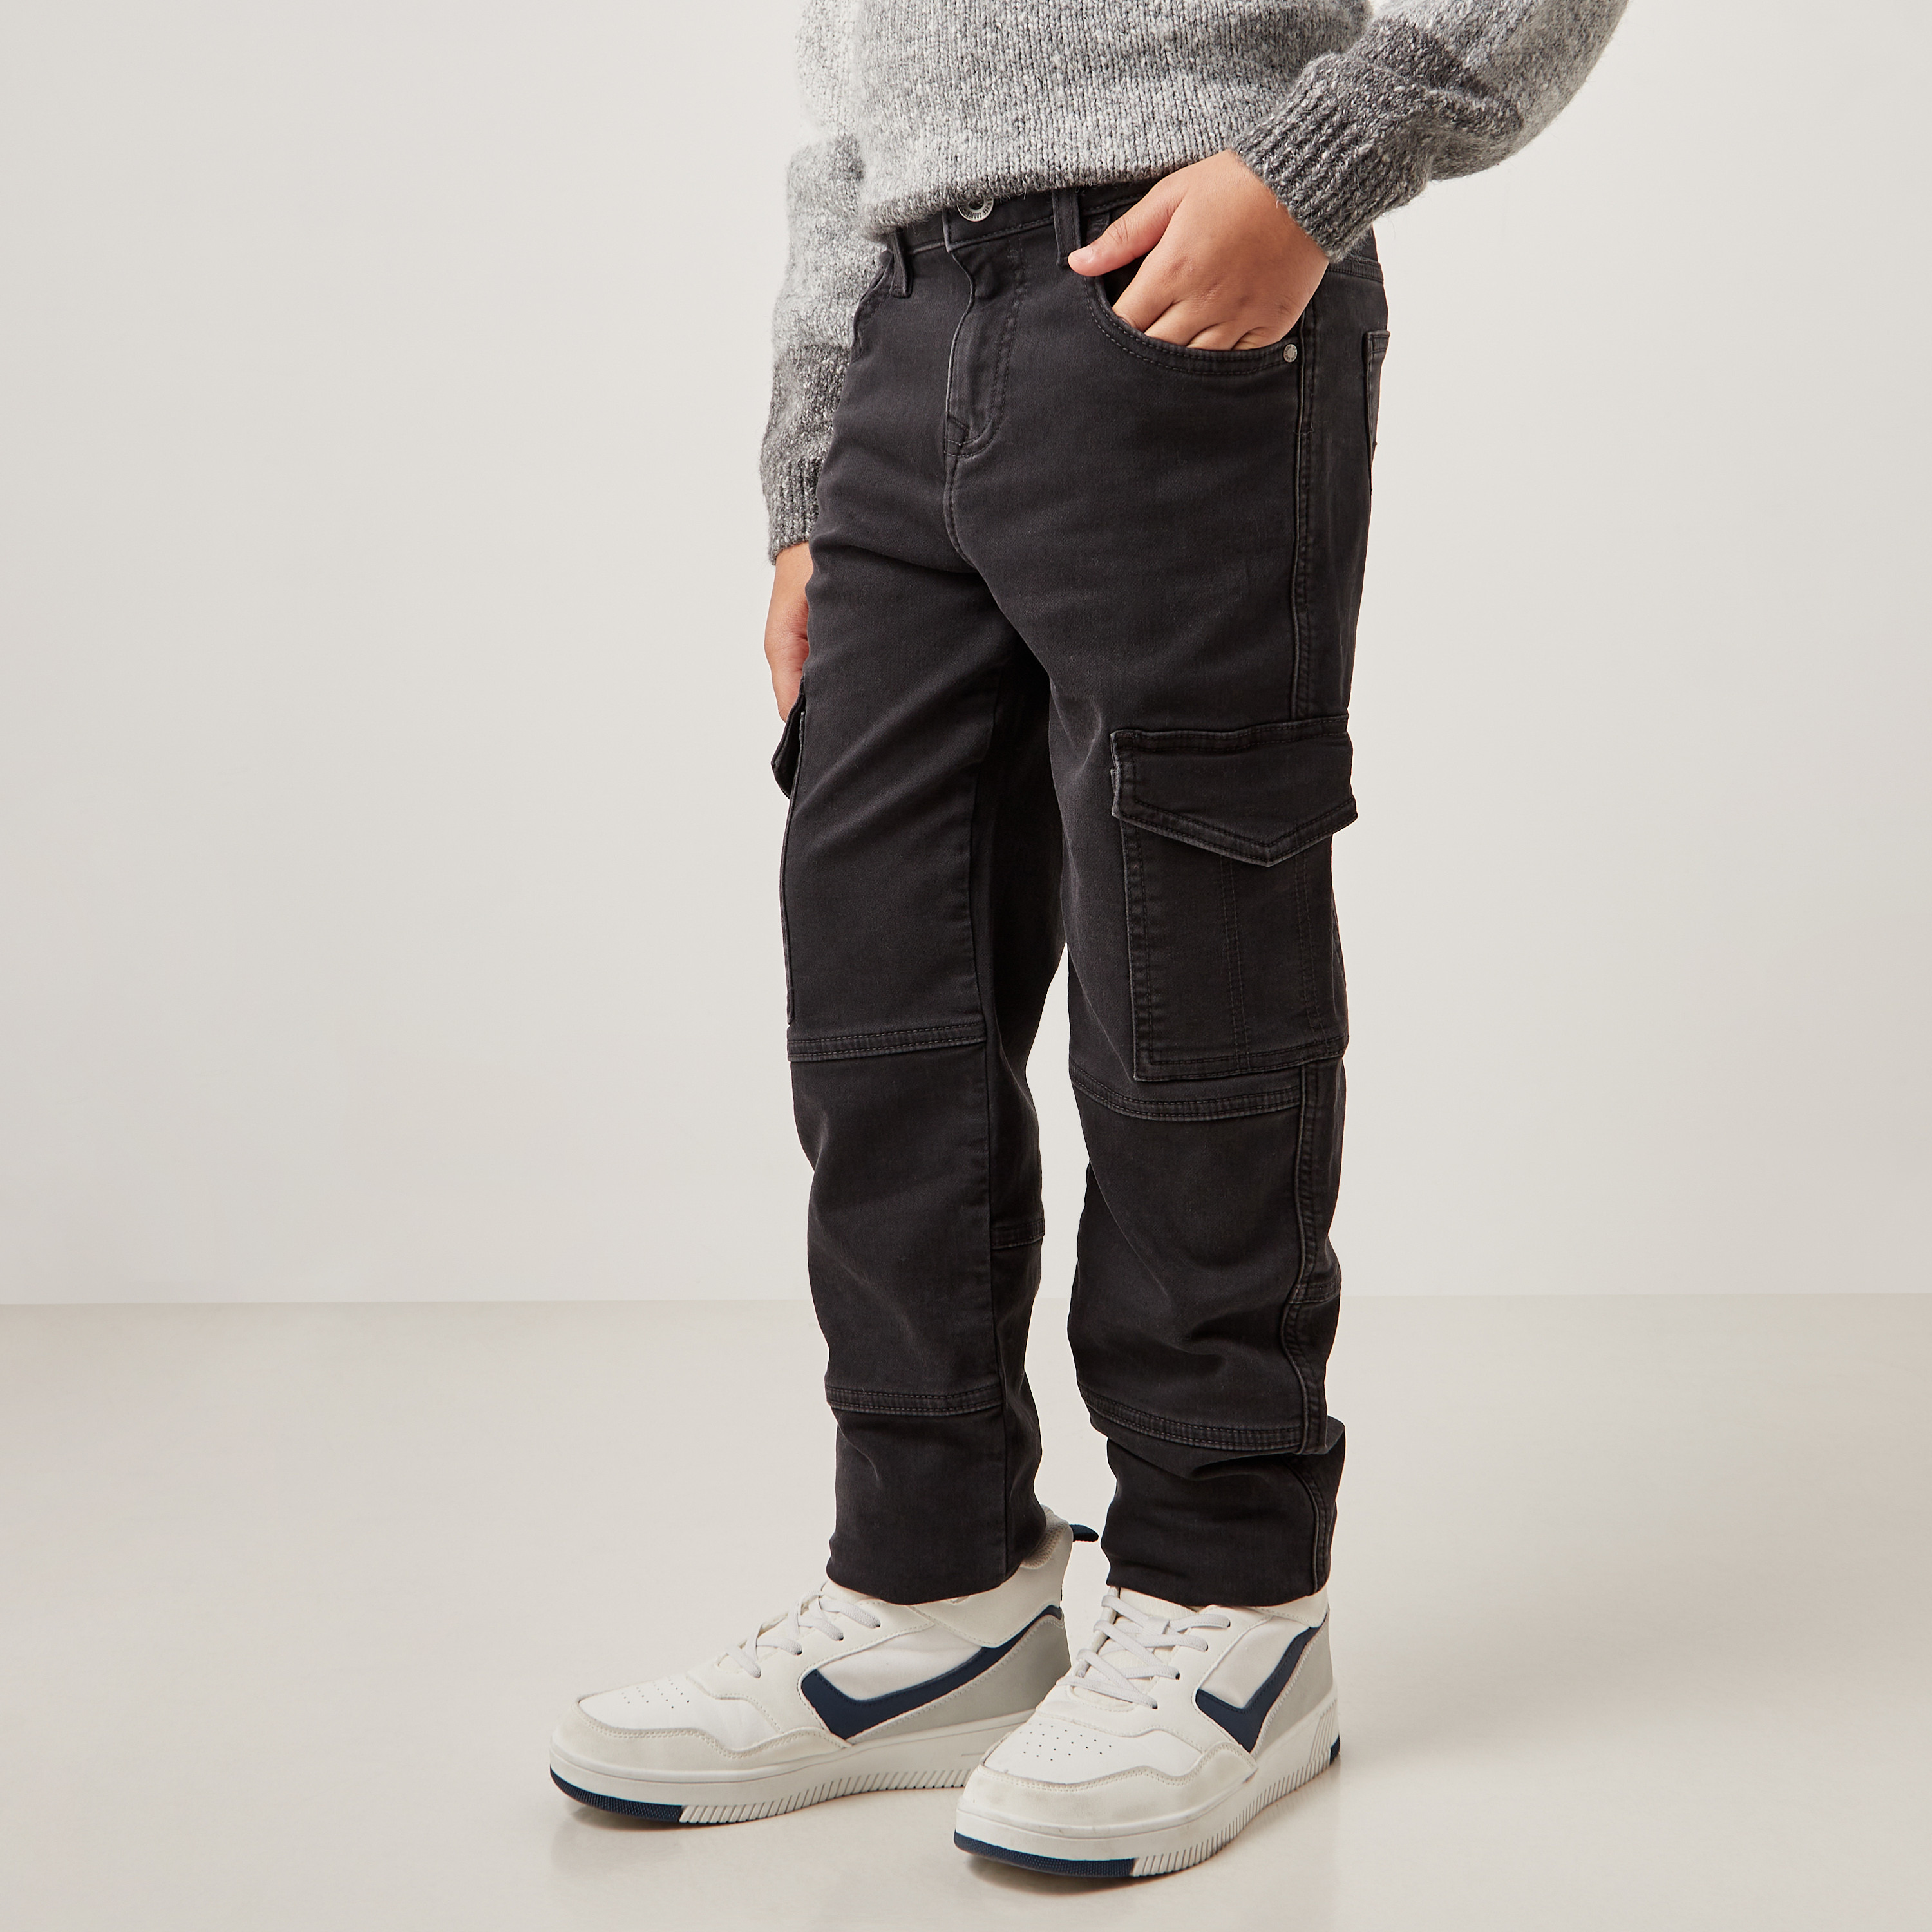 Lee Cooper 213 Two Colour Cargo Trousers | RSIS